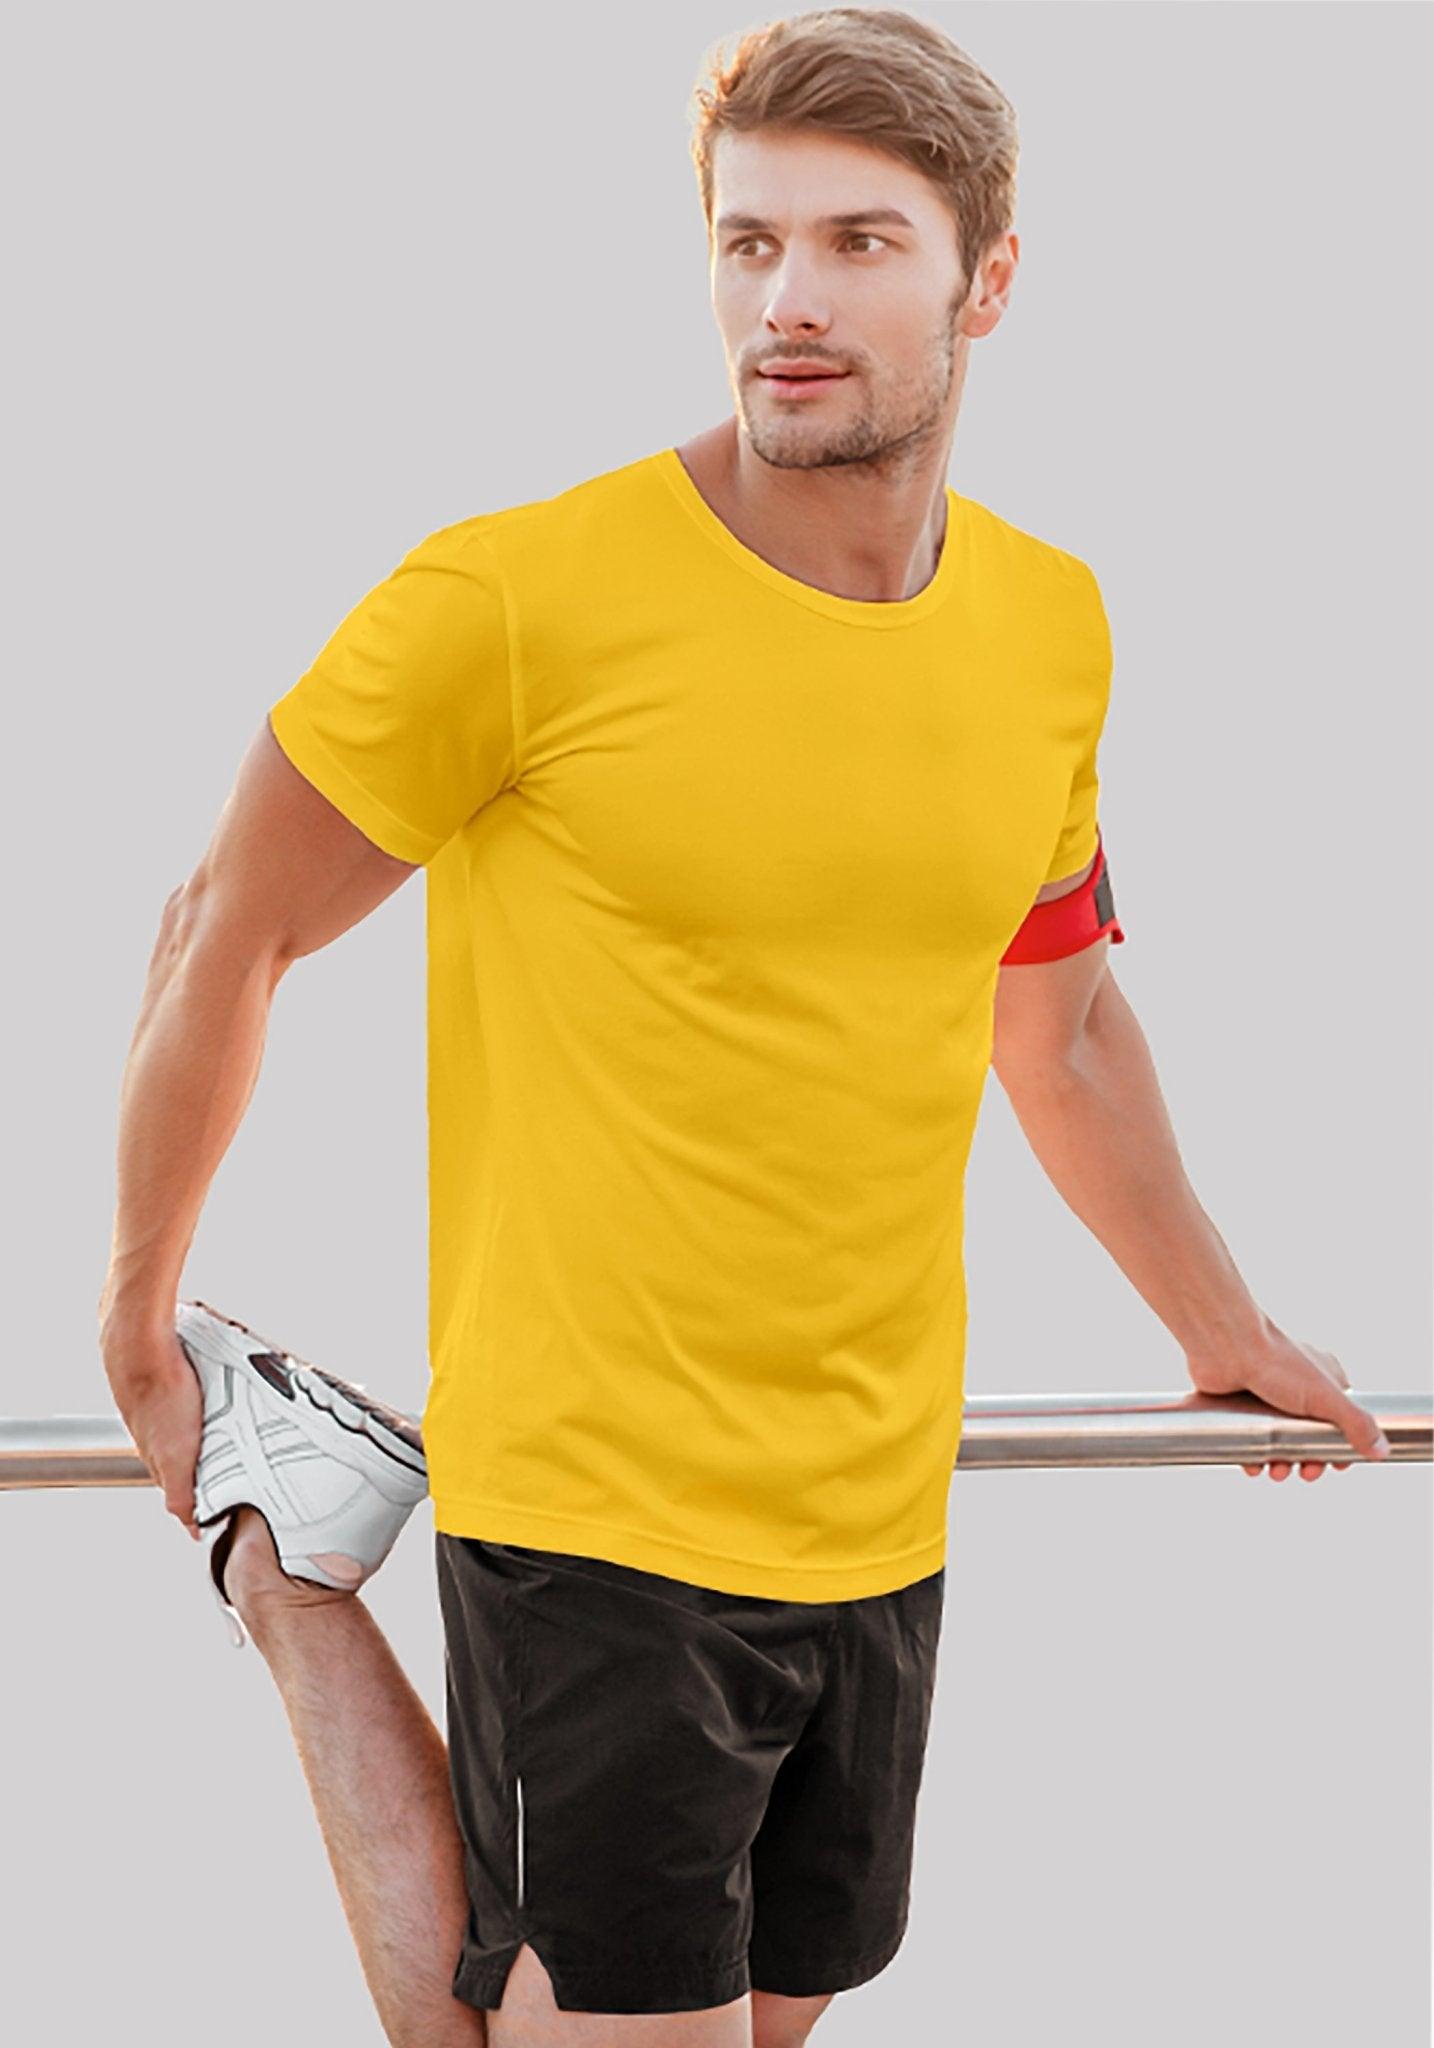 Solid Plain T Shirt Combo For Men In Fire Yellow Colour Variant